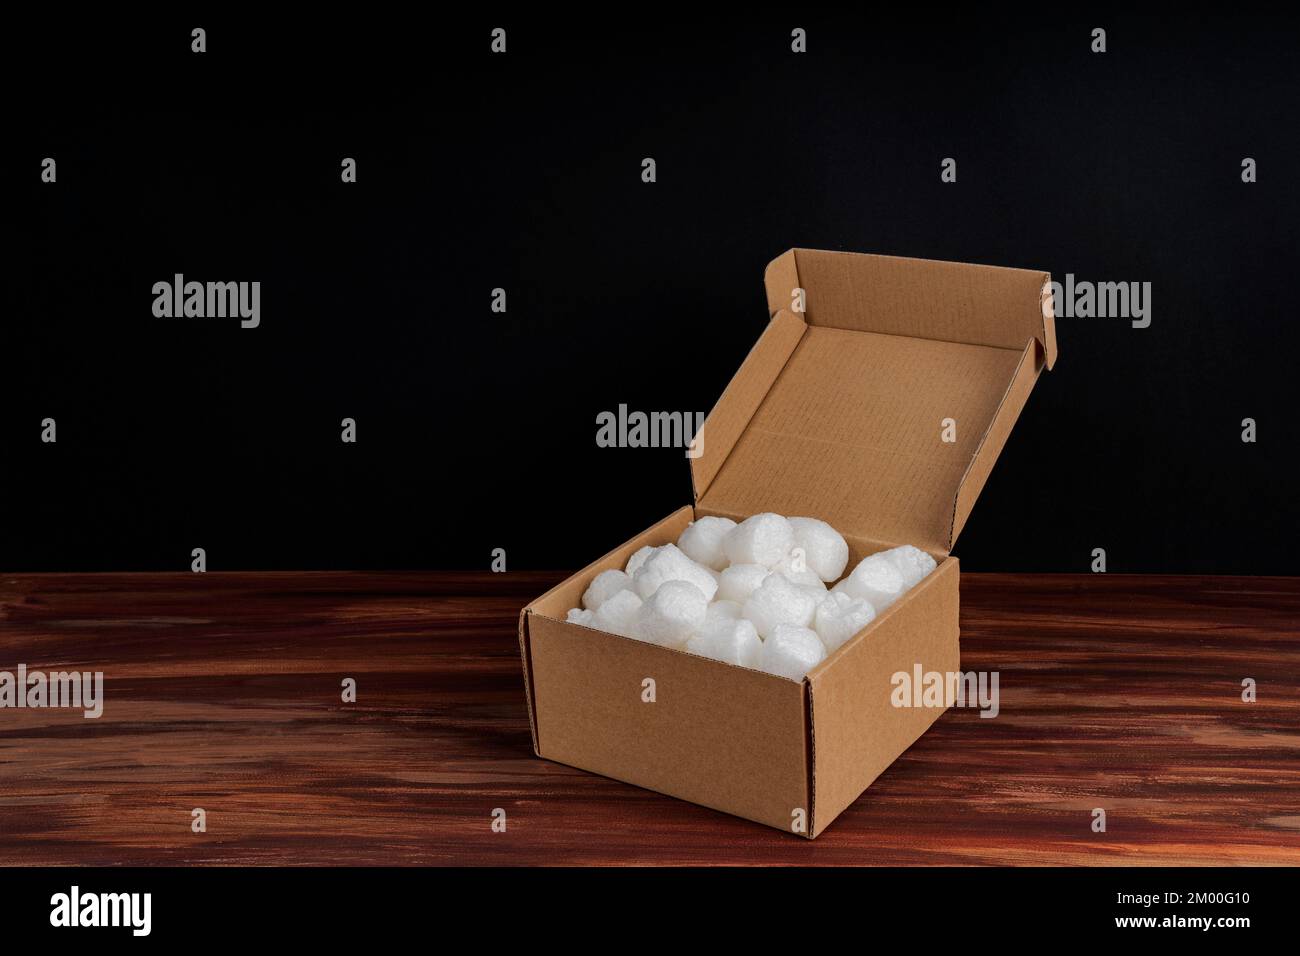 Styrofoam packing peanuts in cardboard box on dark wood background. White no plastic foam pellets protective for parcel packing. Stock Photo